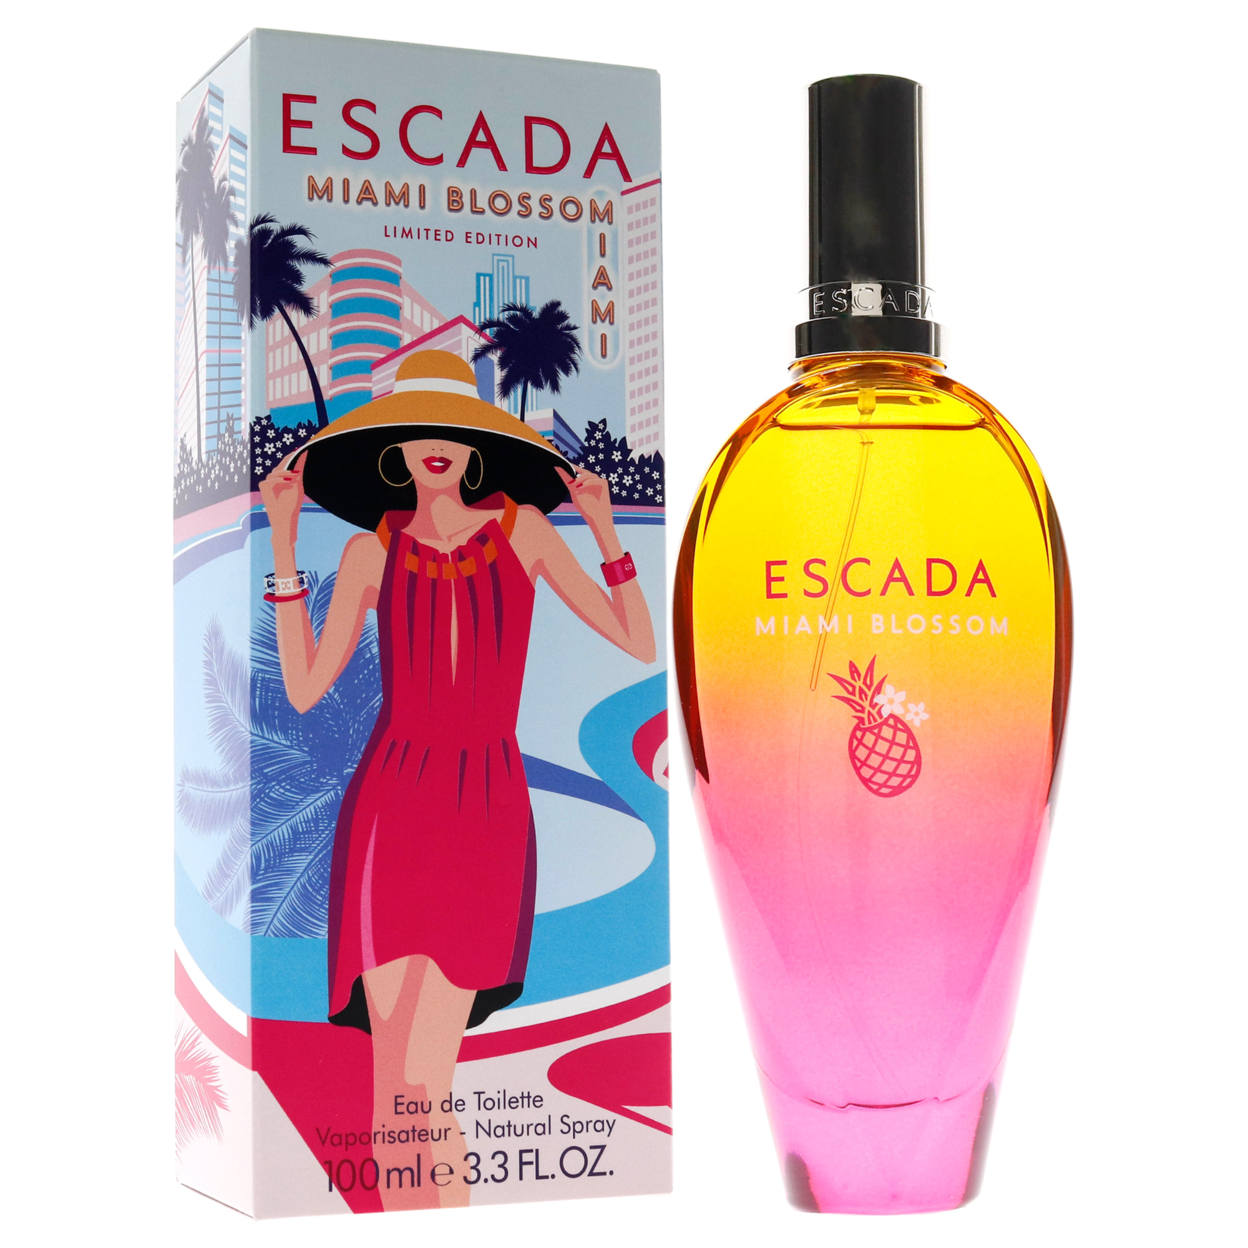 Miami Blossom by Escada for Women - 3.3 oz EDT Spray (Limited Edition) - image 3 of 6